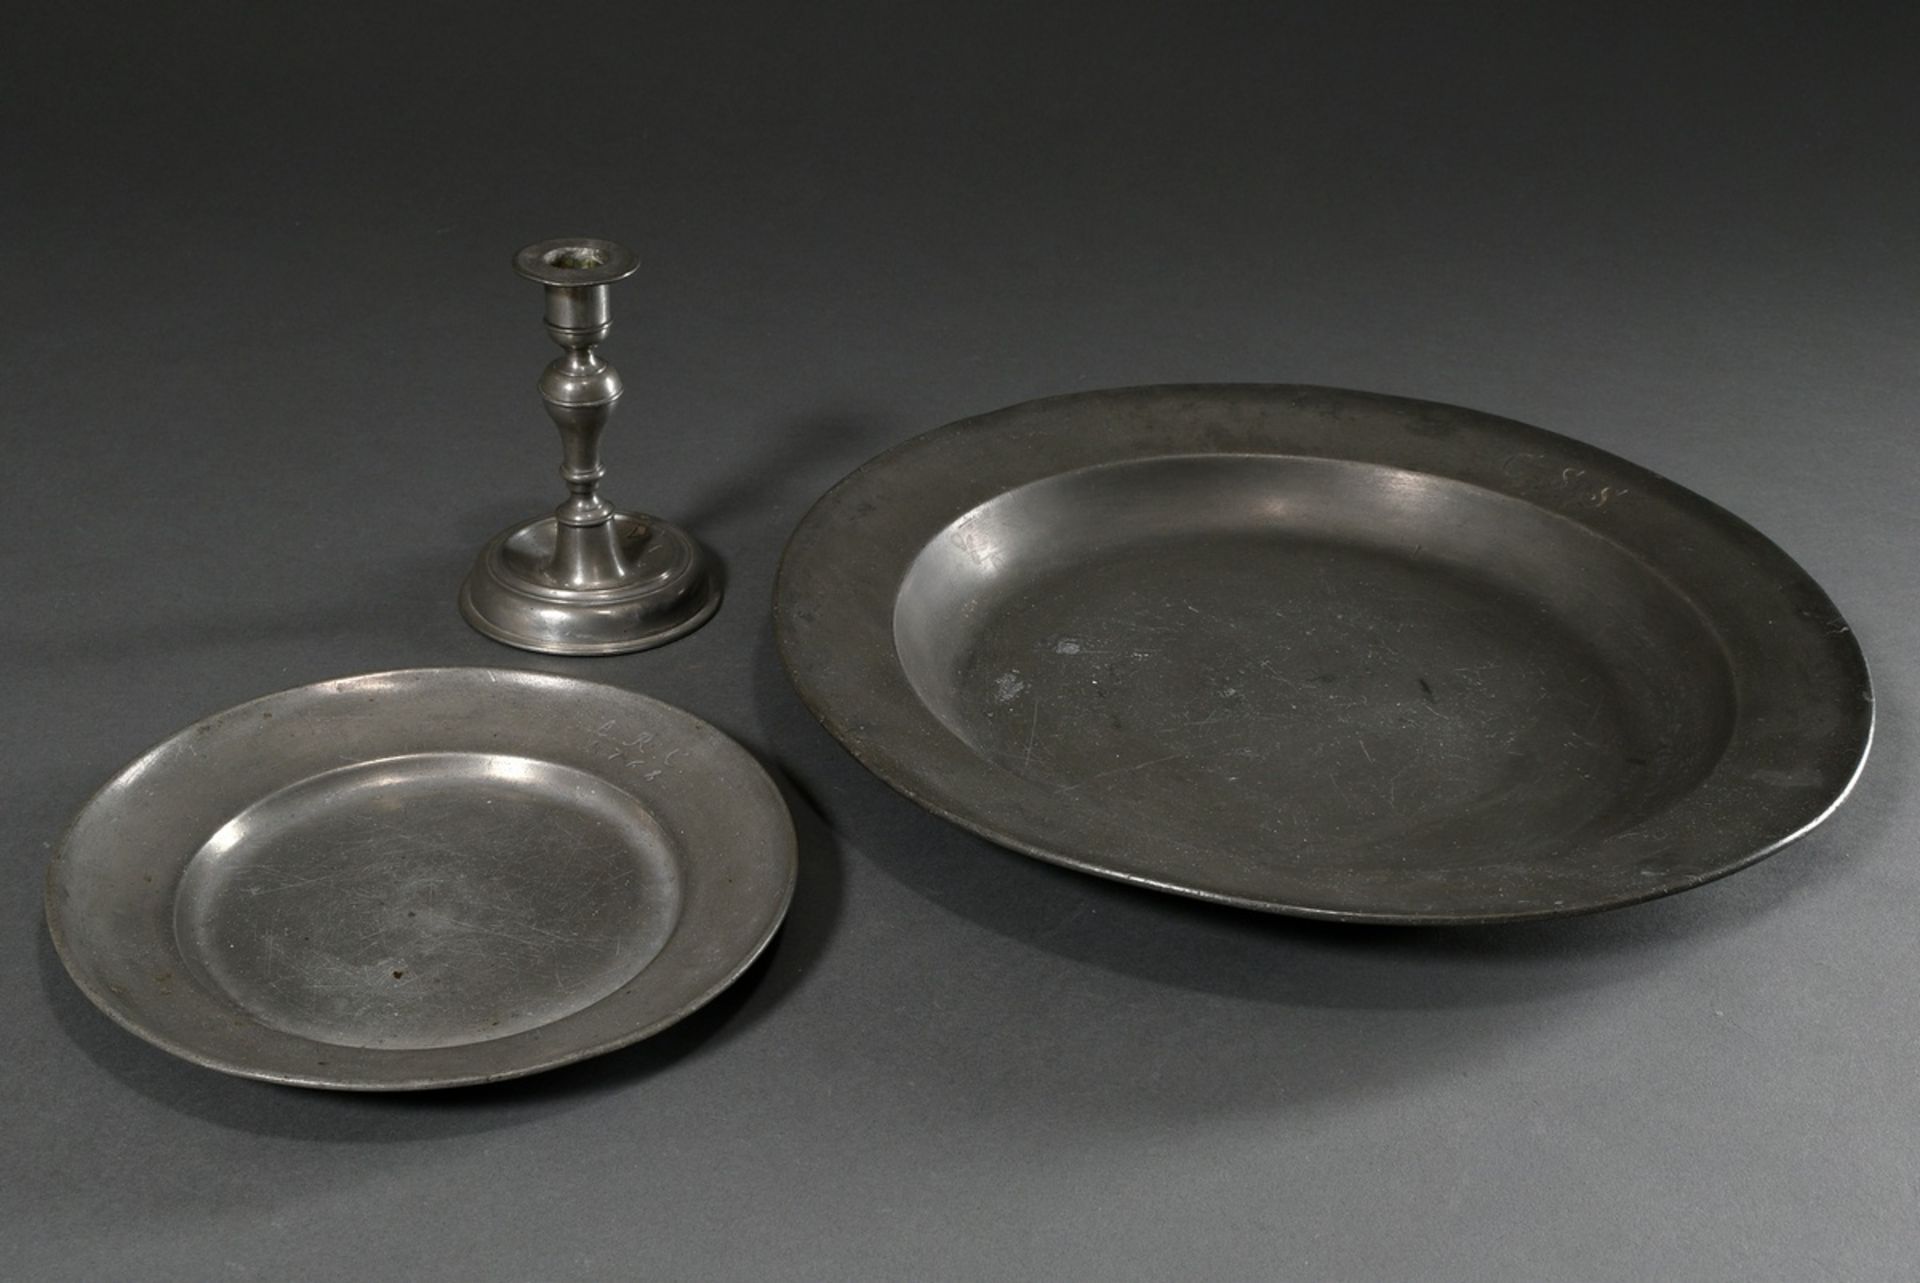 3 Various pieces of pewter, 18th century: large plate with engraved owner's monogram "C.S.S. 1775", - Image 8 of 11